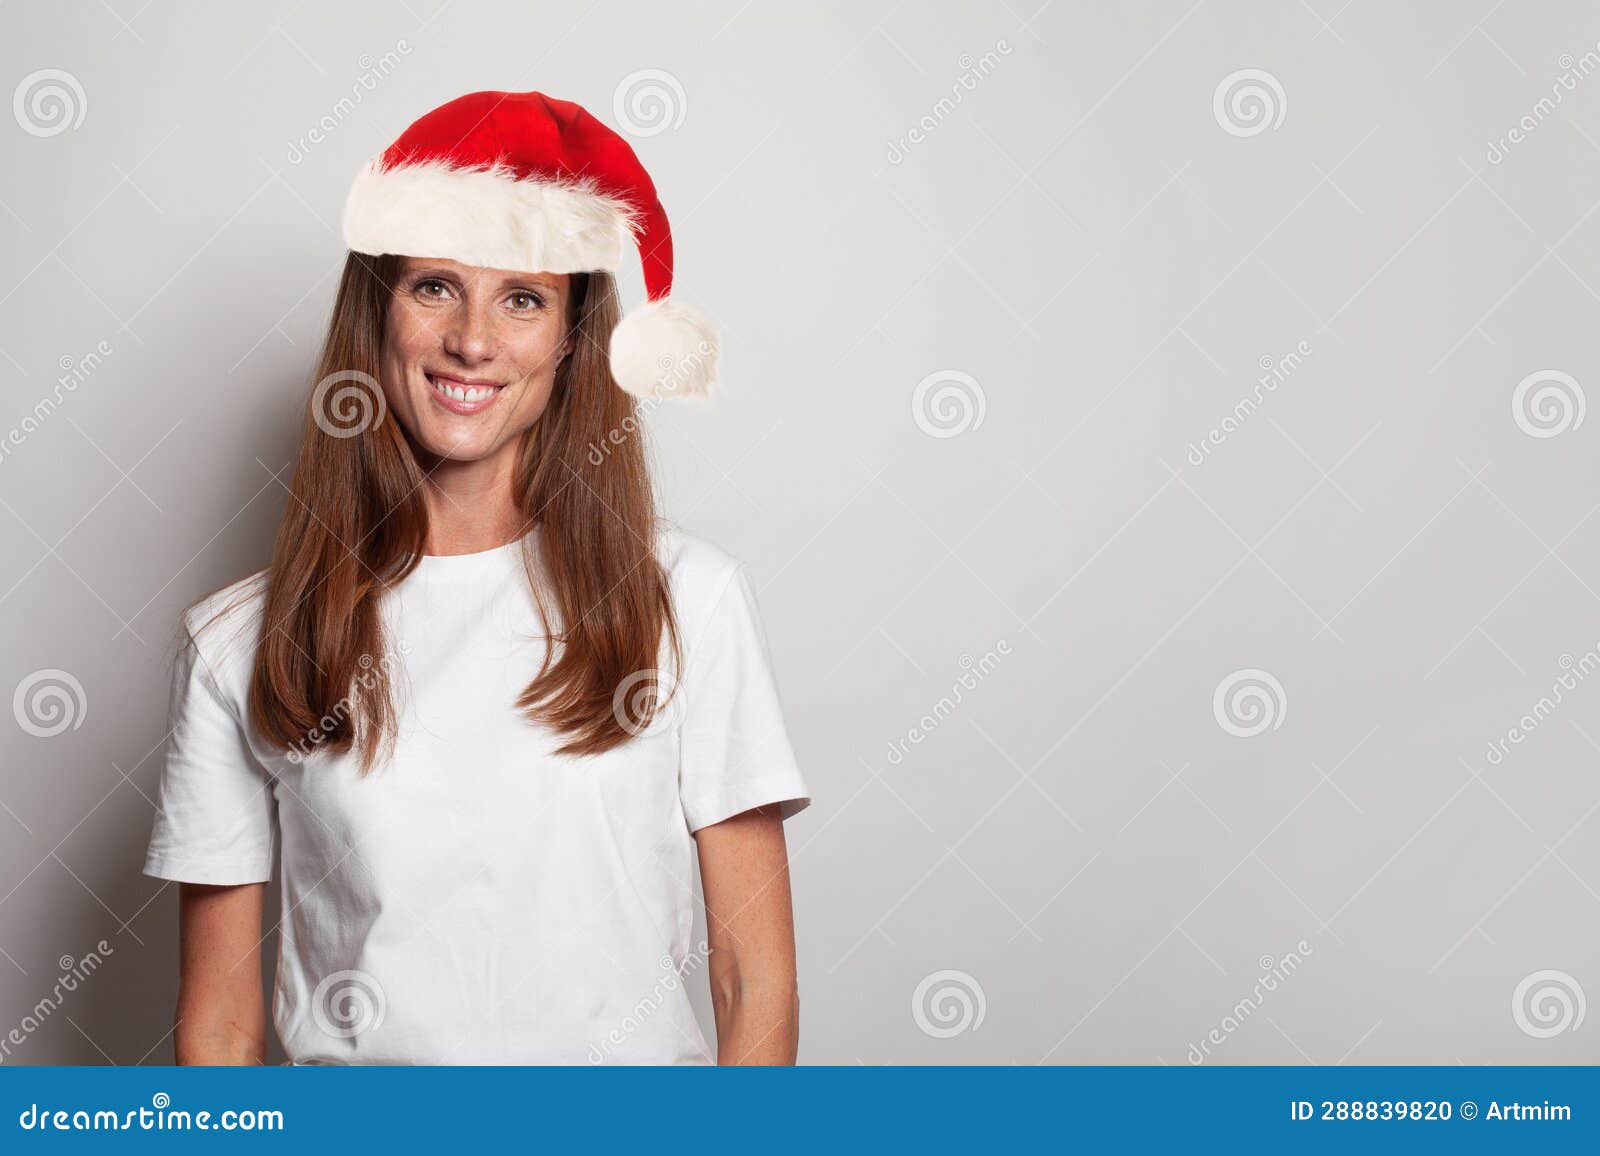 christmas portrait of happy woman sante in white t-shirt on white background